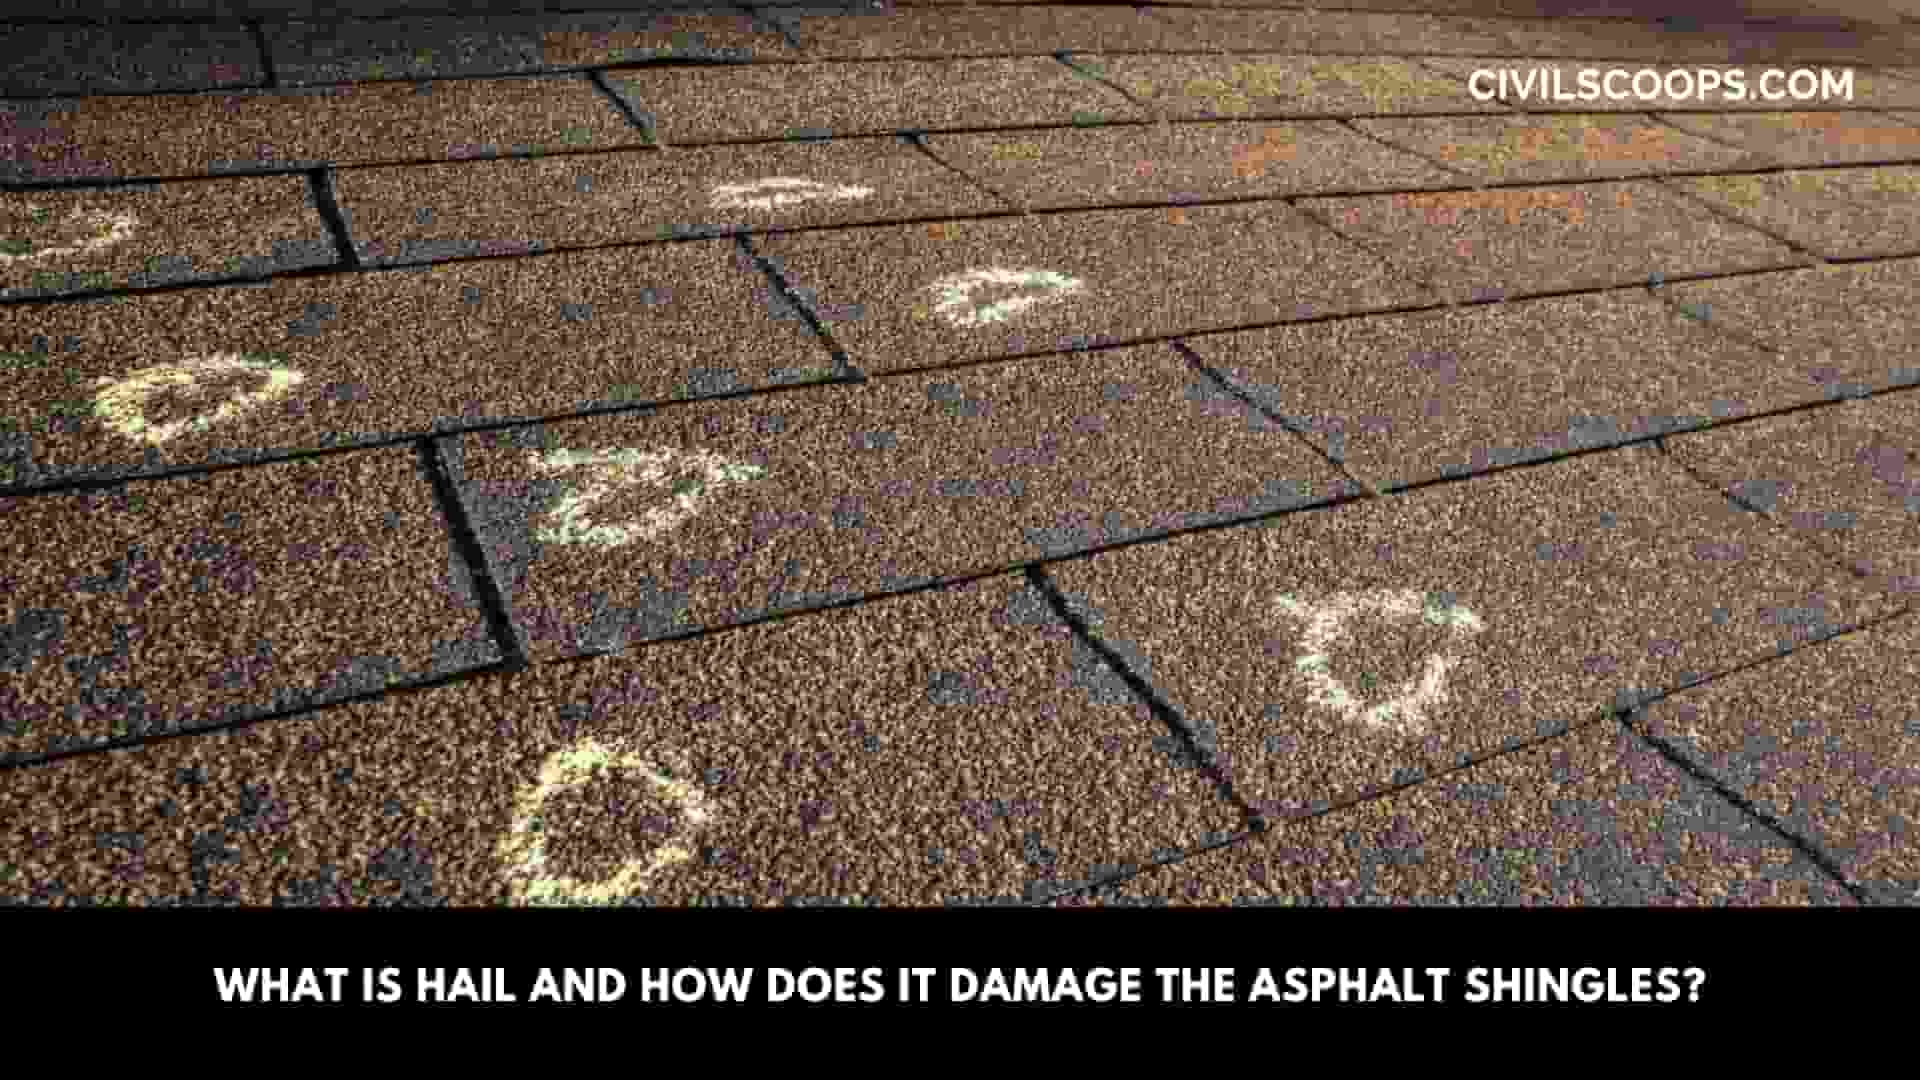 What Is Hail and How Does It Damage the Asphalt Shingles?